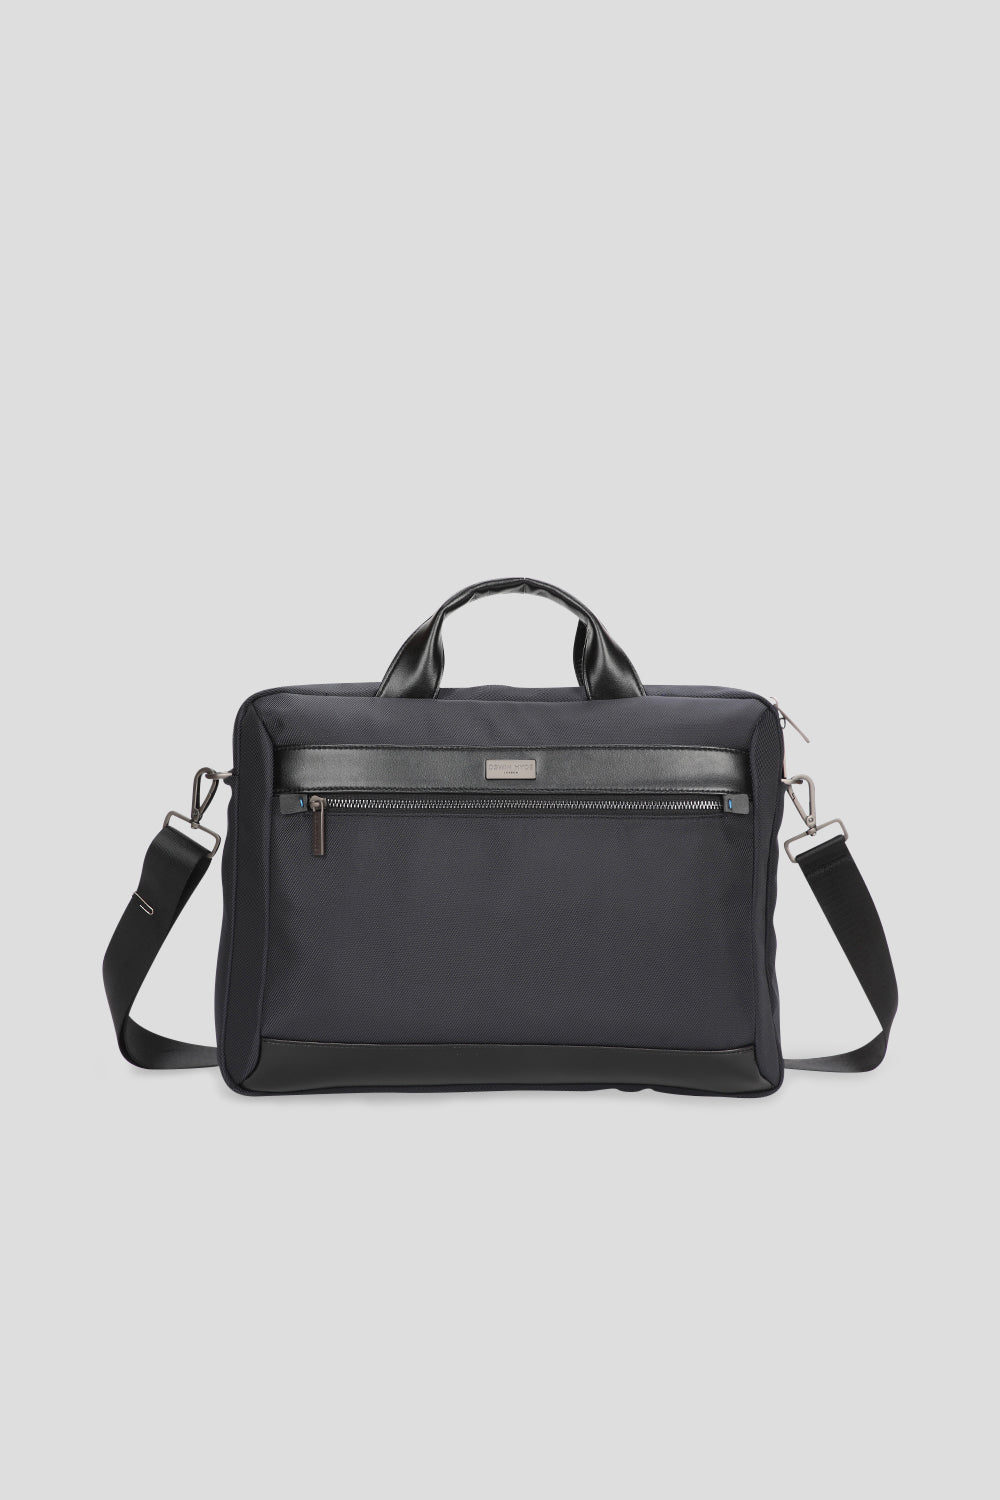 Clapton bag in navy colour laptop bag for men from oswin hyde